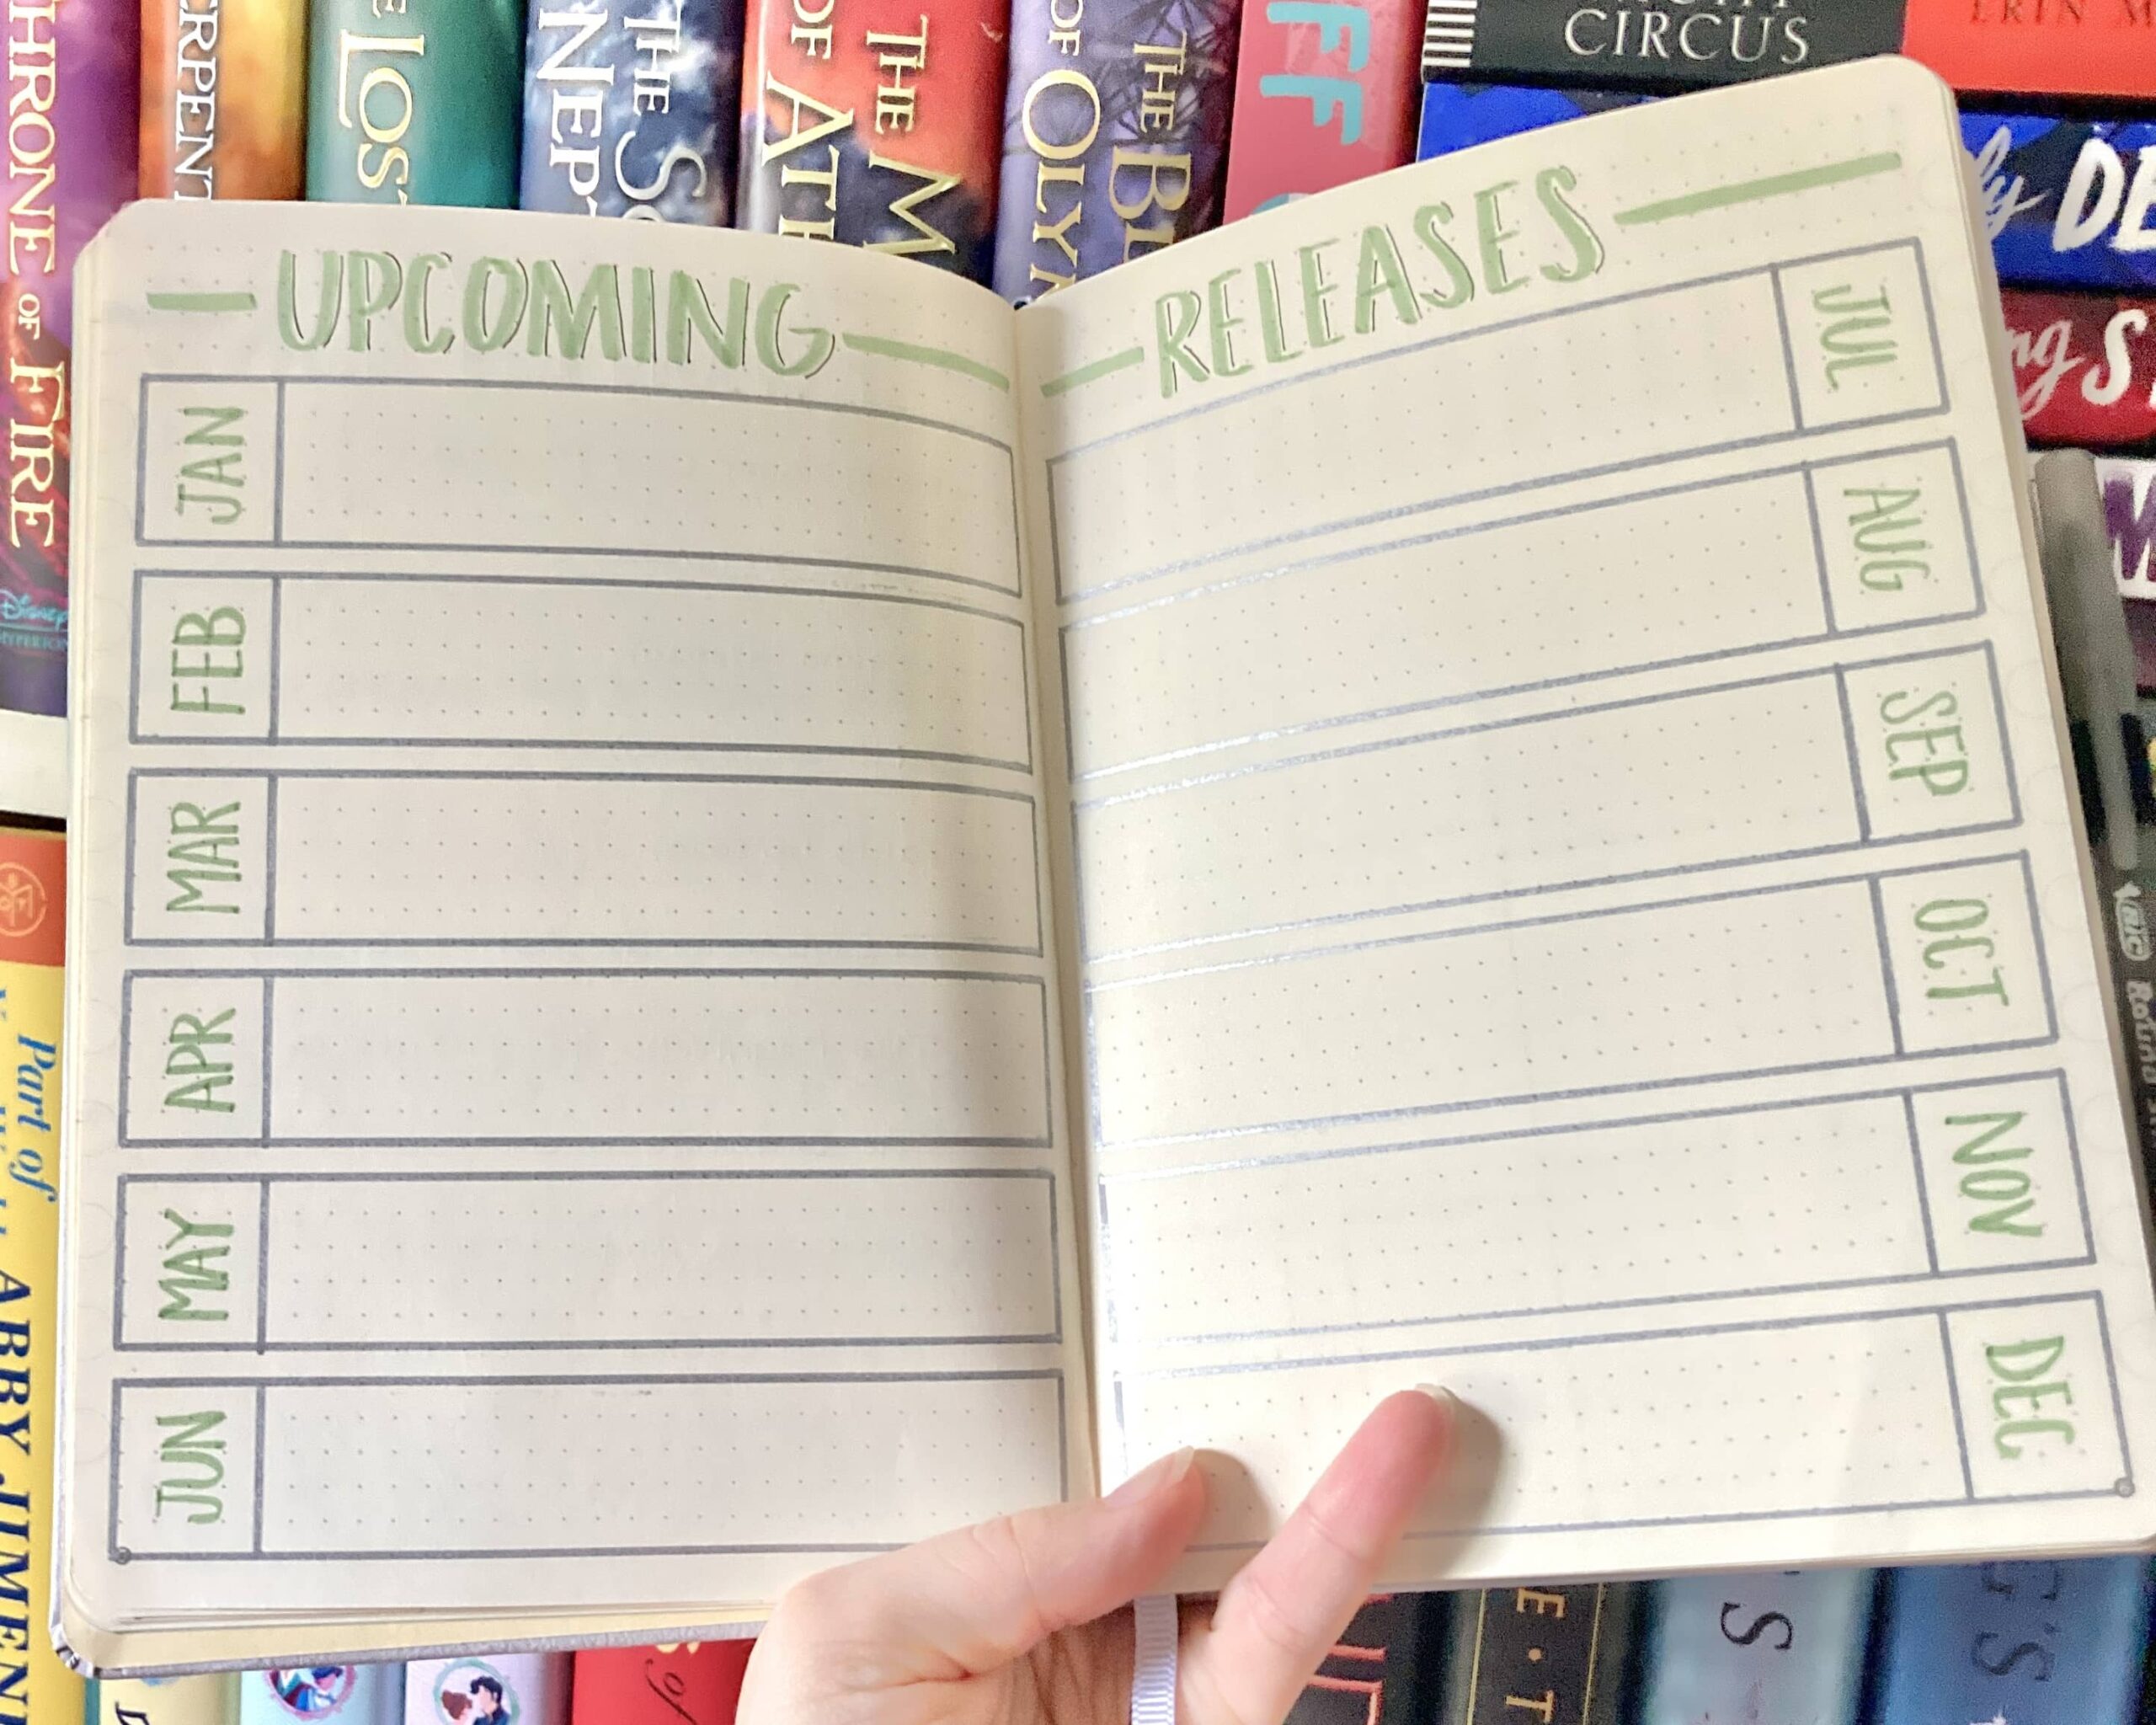 Upcoming Releases book journal pages